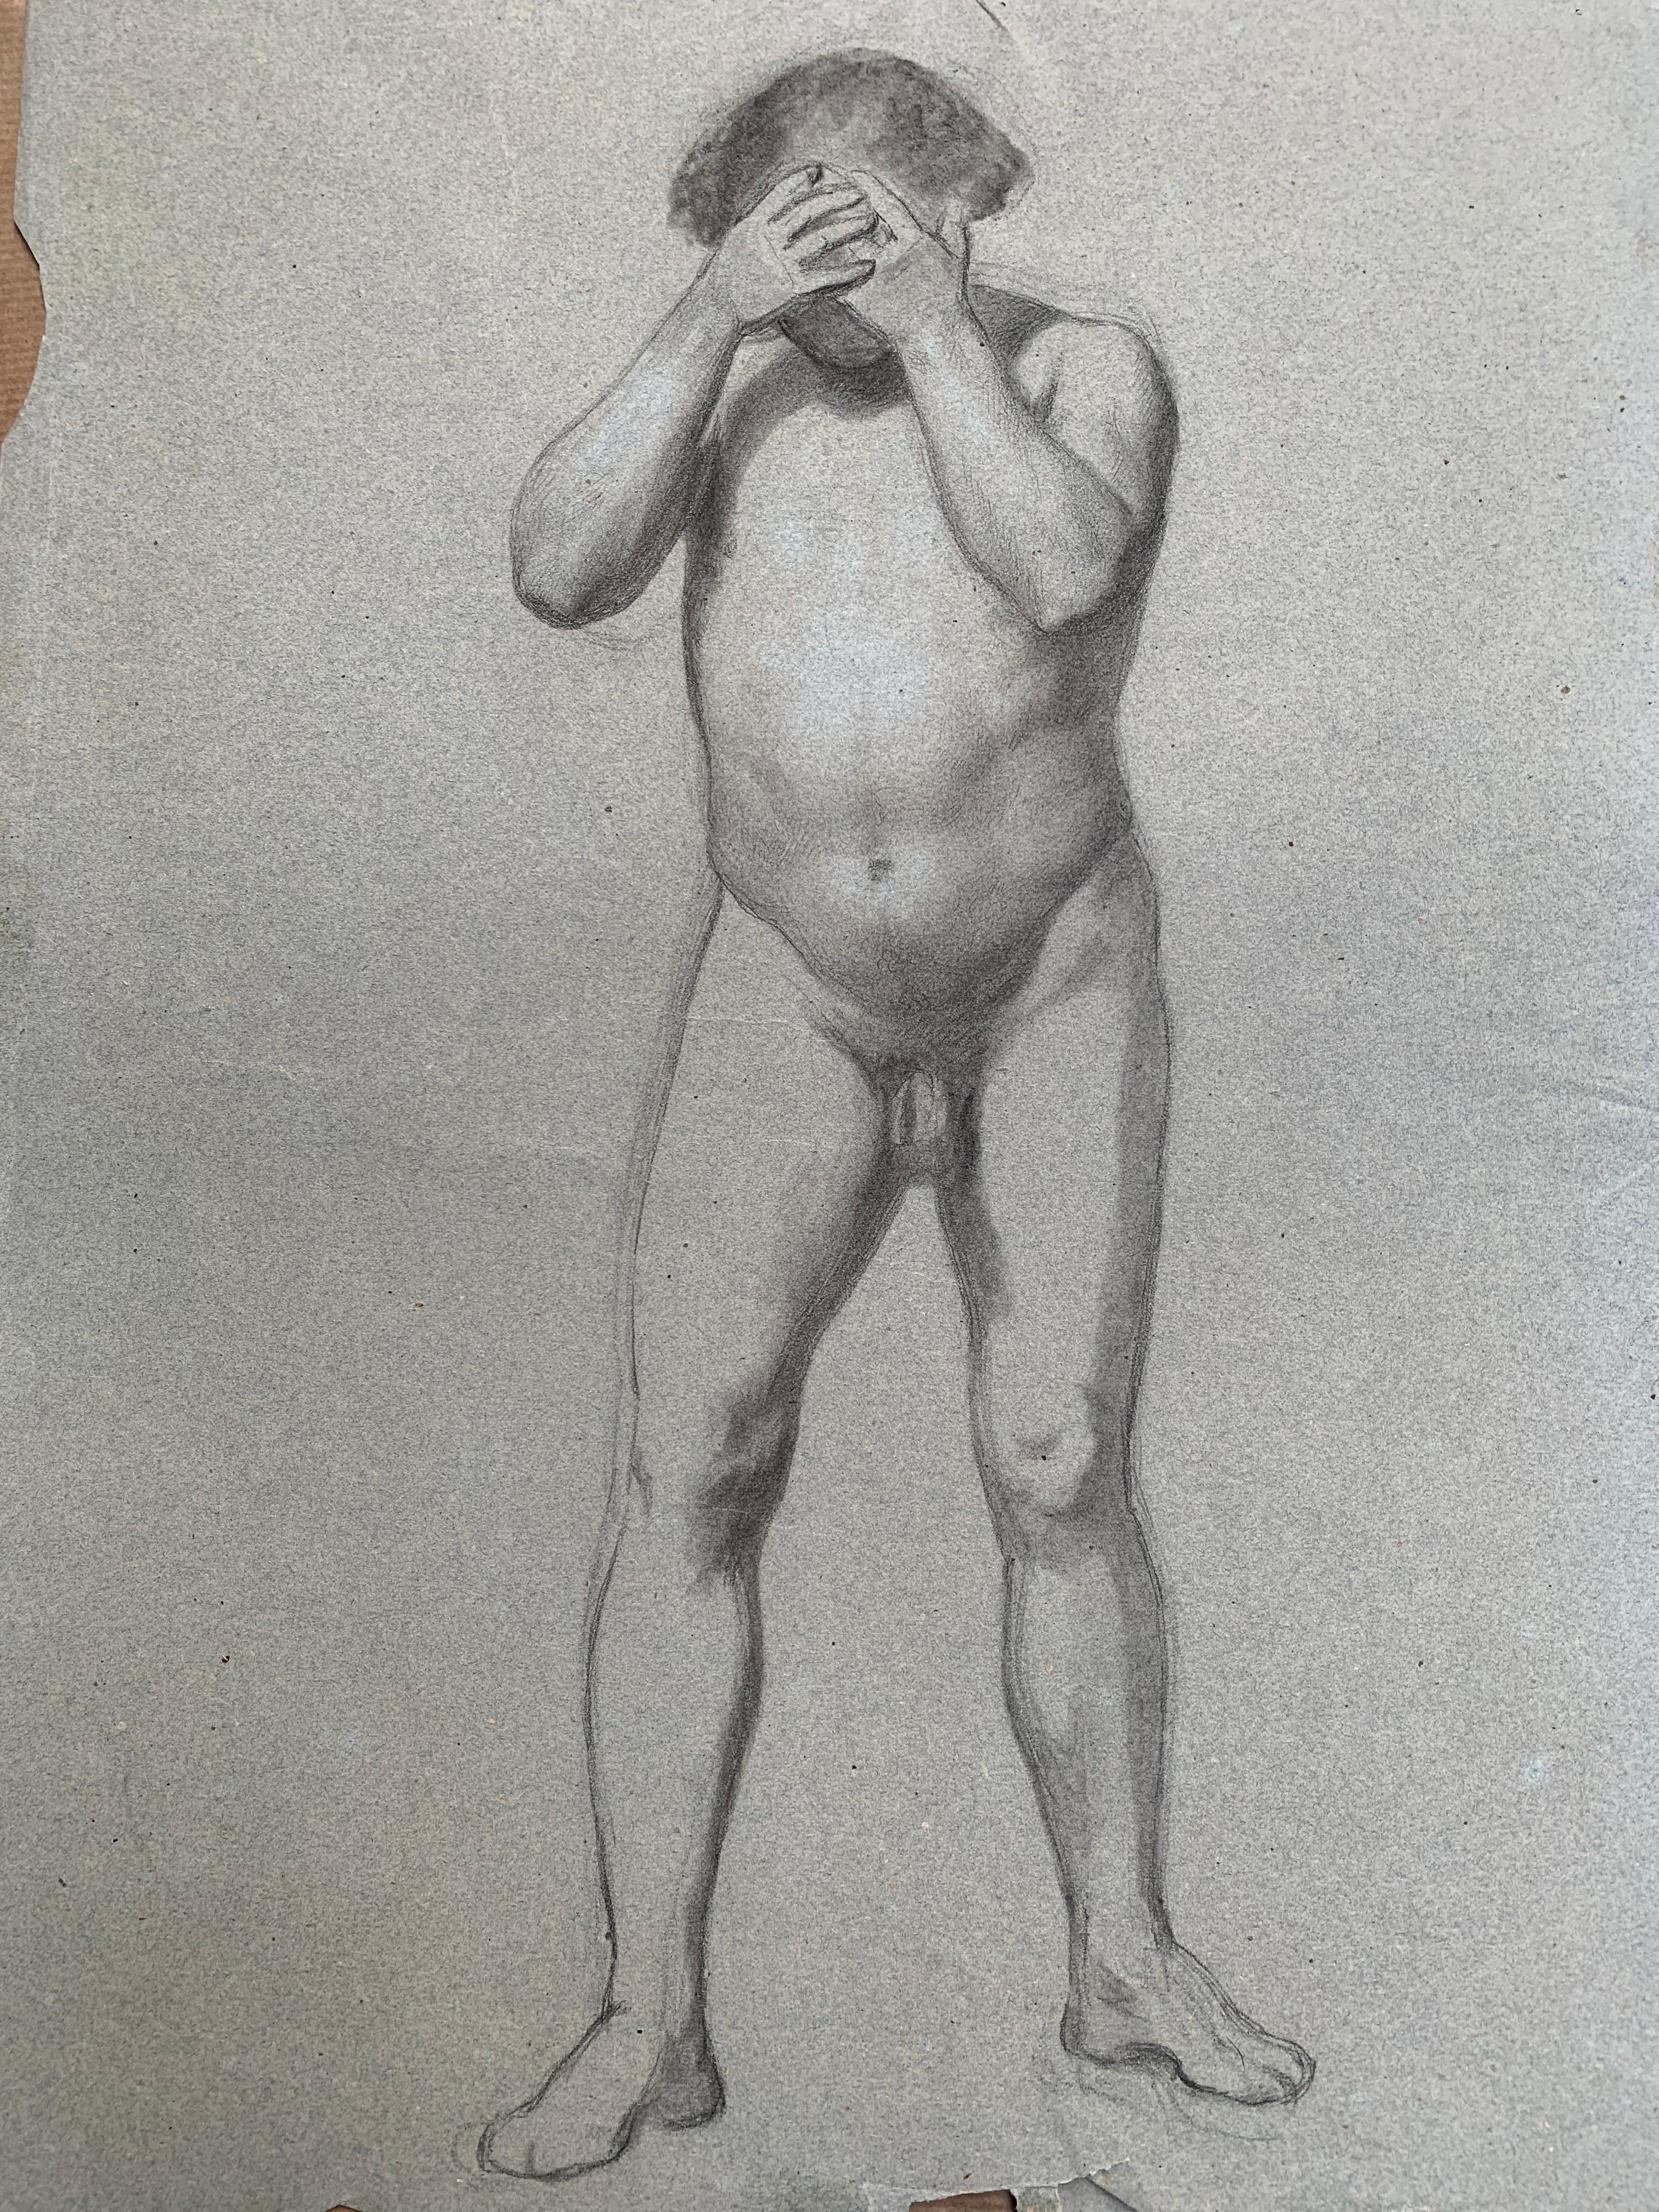 Preparatory anatomical study for the figure of a man with hands on his face. For Sale 3